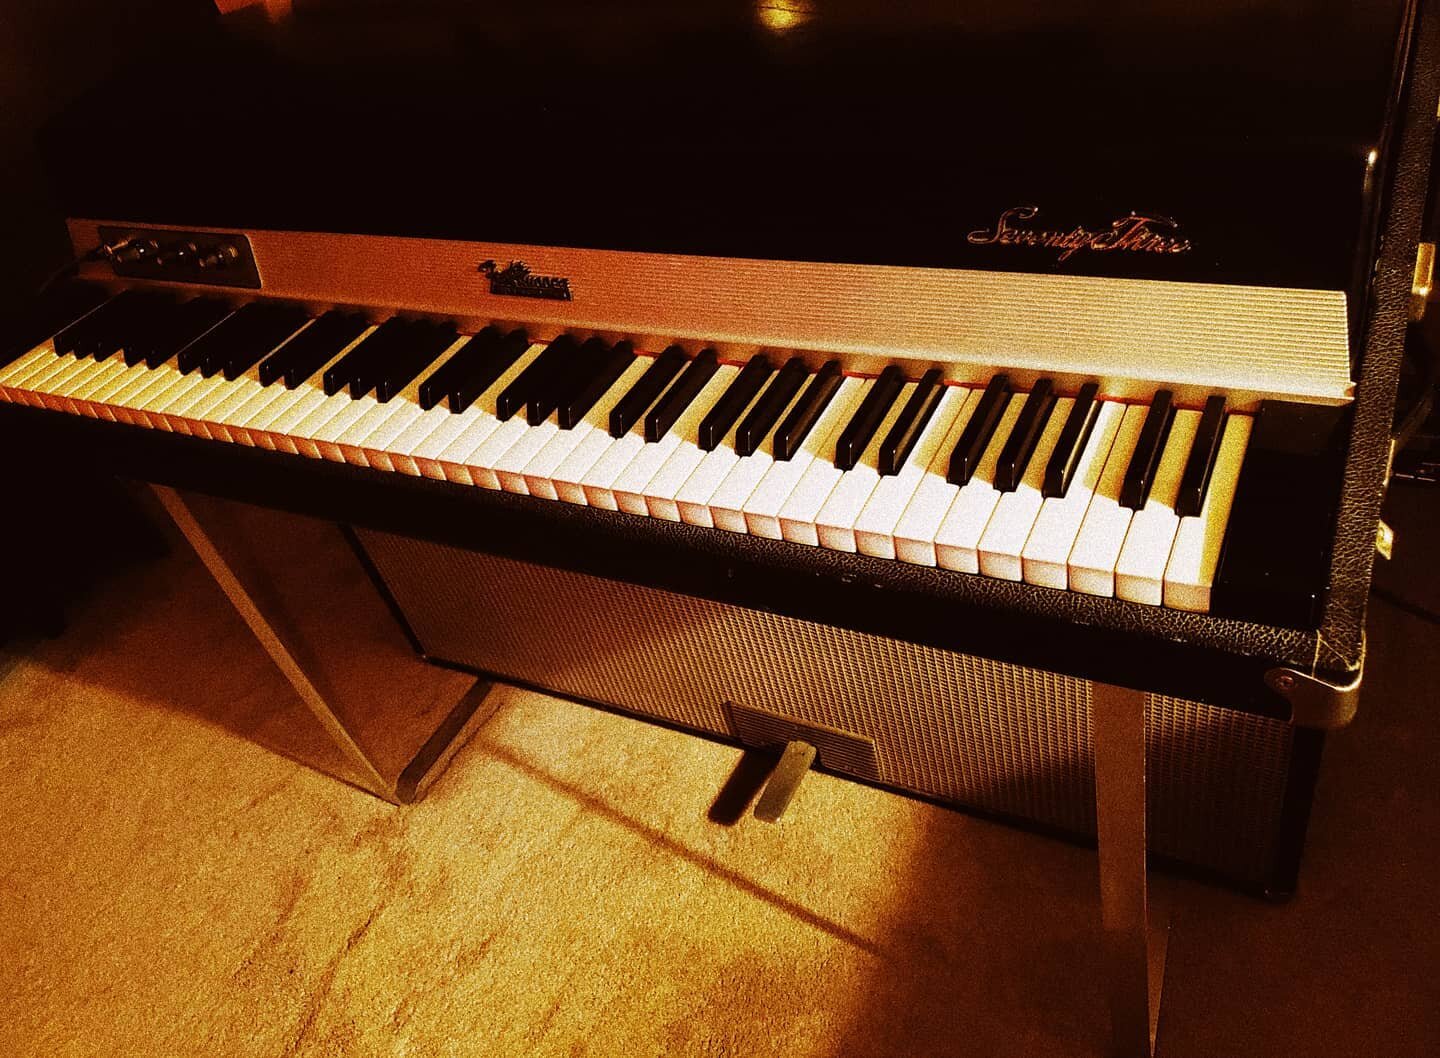 Ahhh...the Rhodes 73 Suitcase rebuild is complete, and my oh my is she sweet. From buttery to bark with the flick of a wrist. To finally get this beauty properly playable, only to have to return to its rightful owner... 😢🤣
.
.
.
#rhodespiano #fende